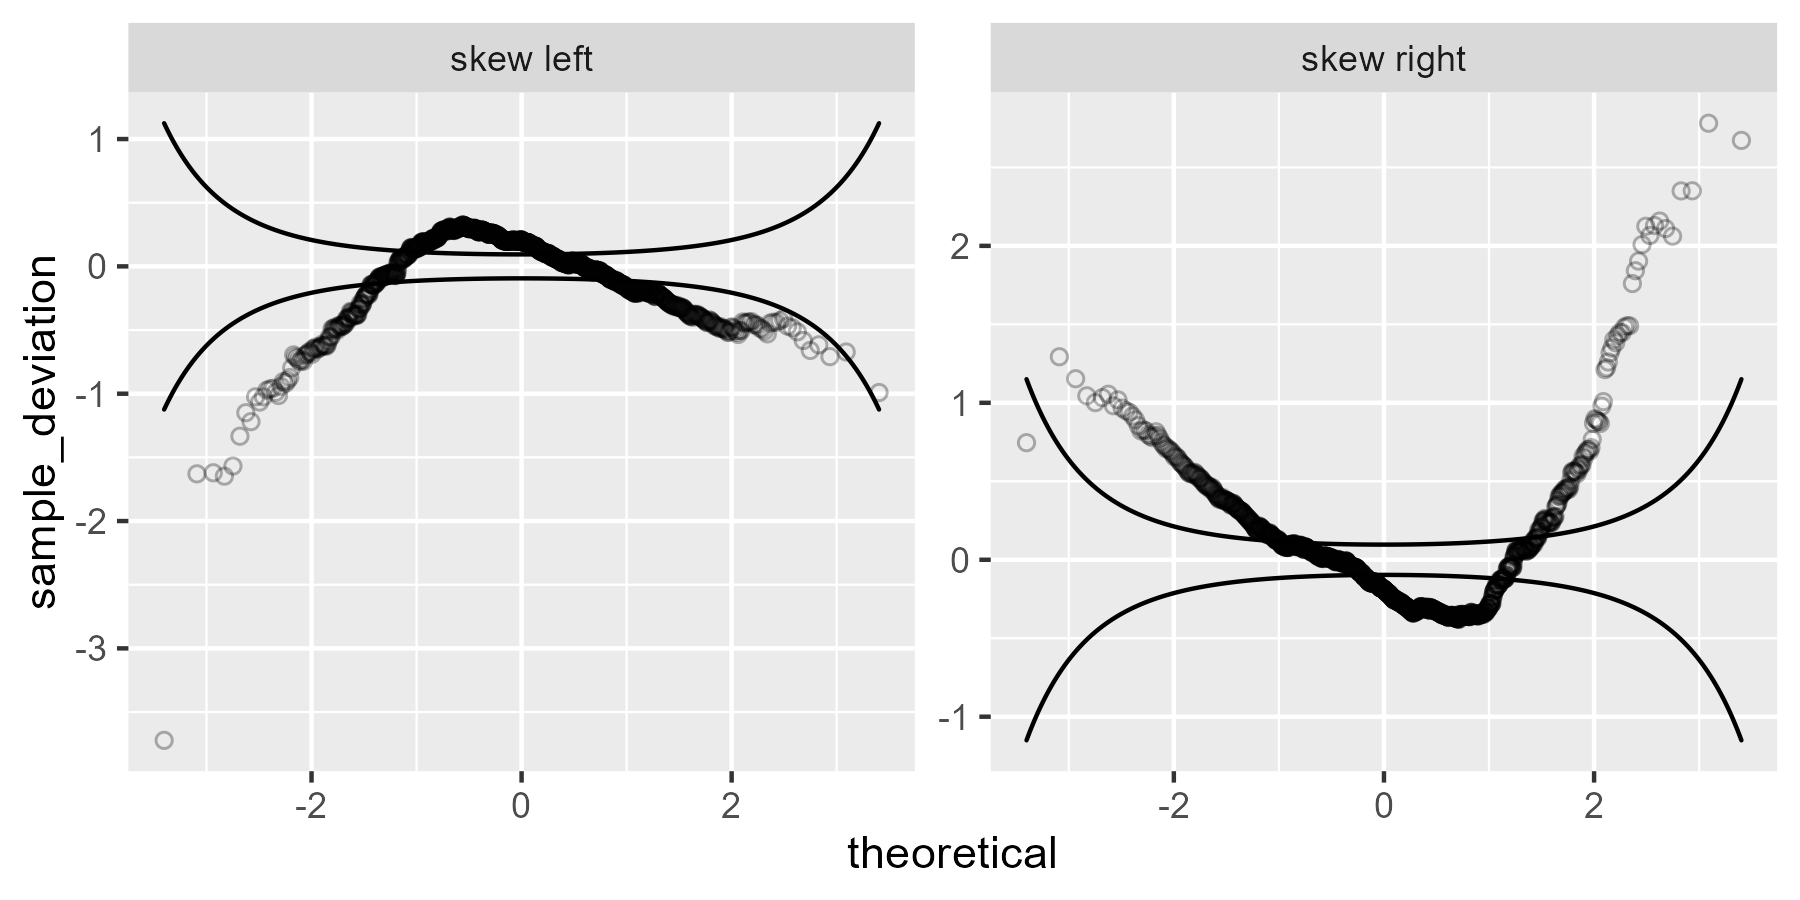 Worm plots for skewed distributed data.